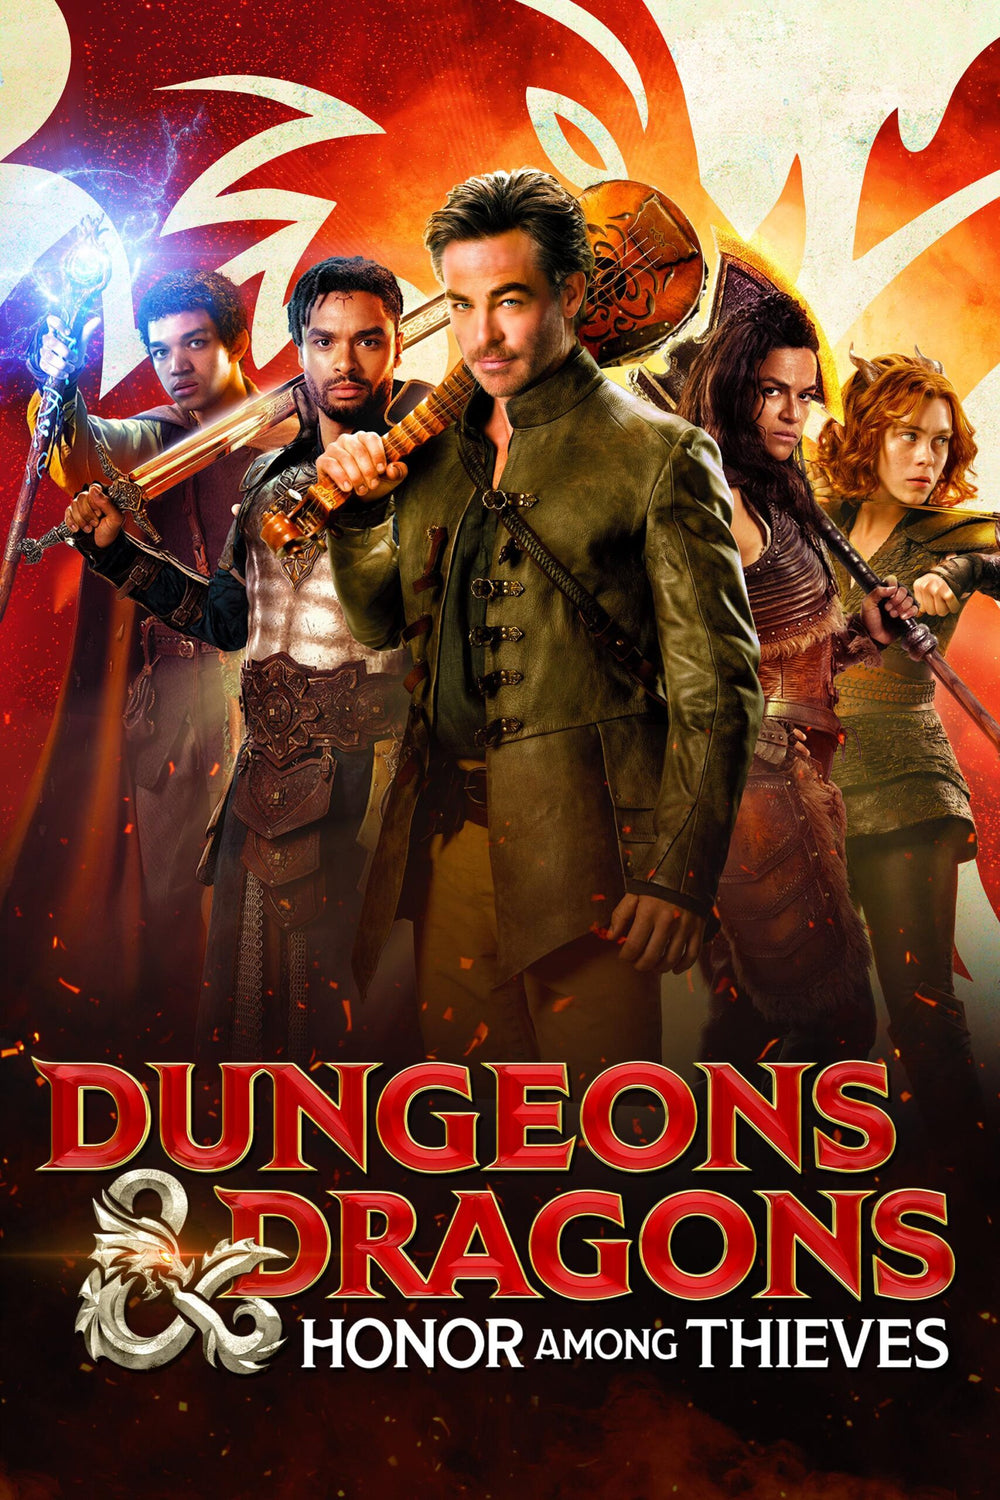 DUNGEONS AND DRAGONS HONOR AMONG THIEVES 4K VUDU or iTunes Via Paramount redeem